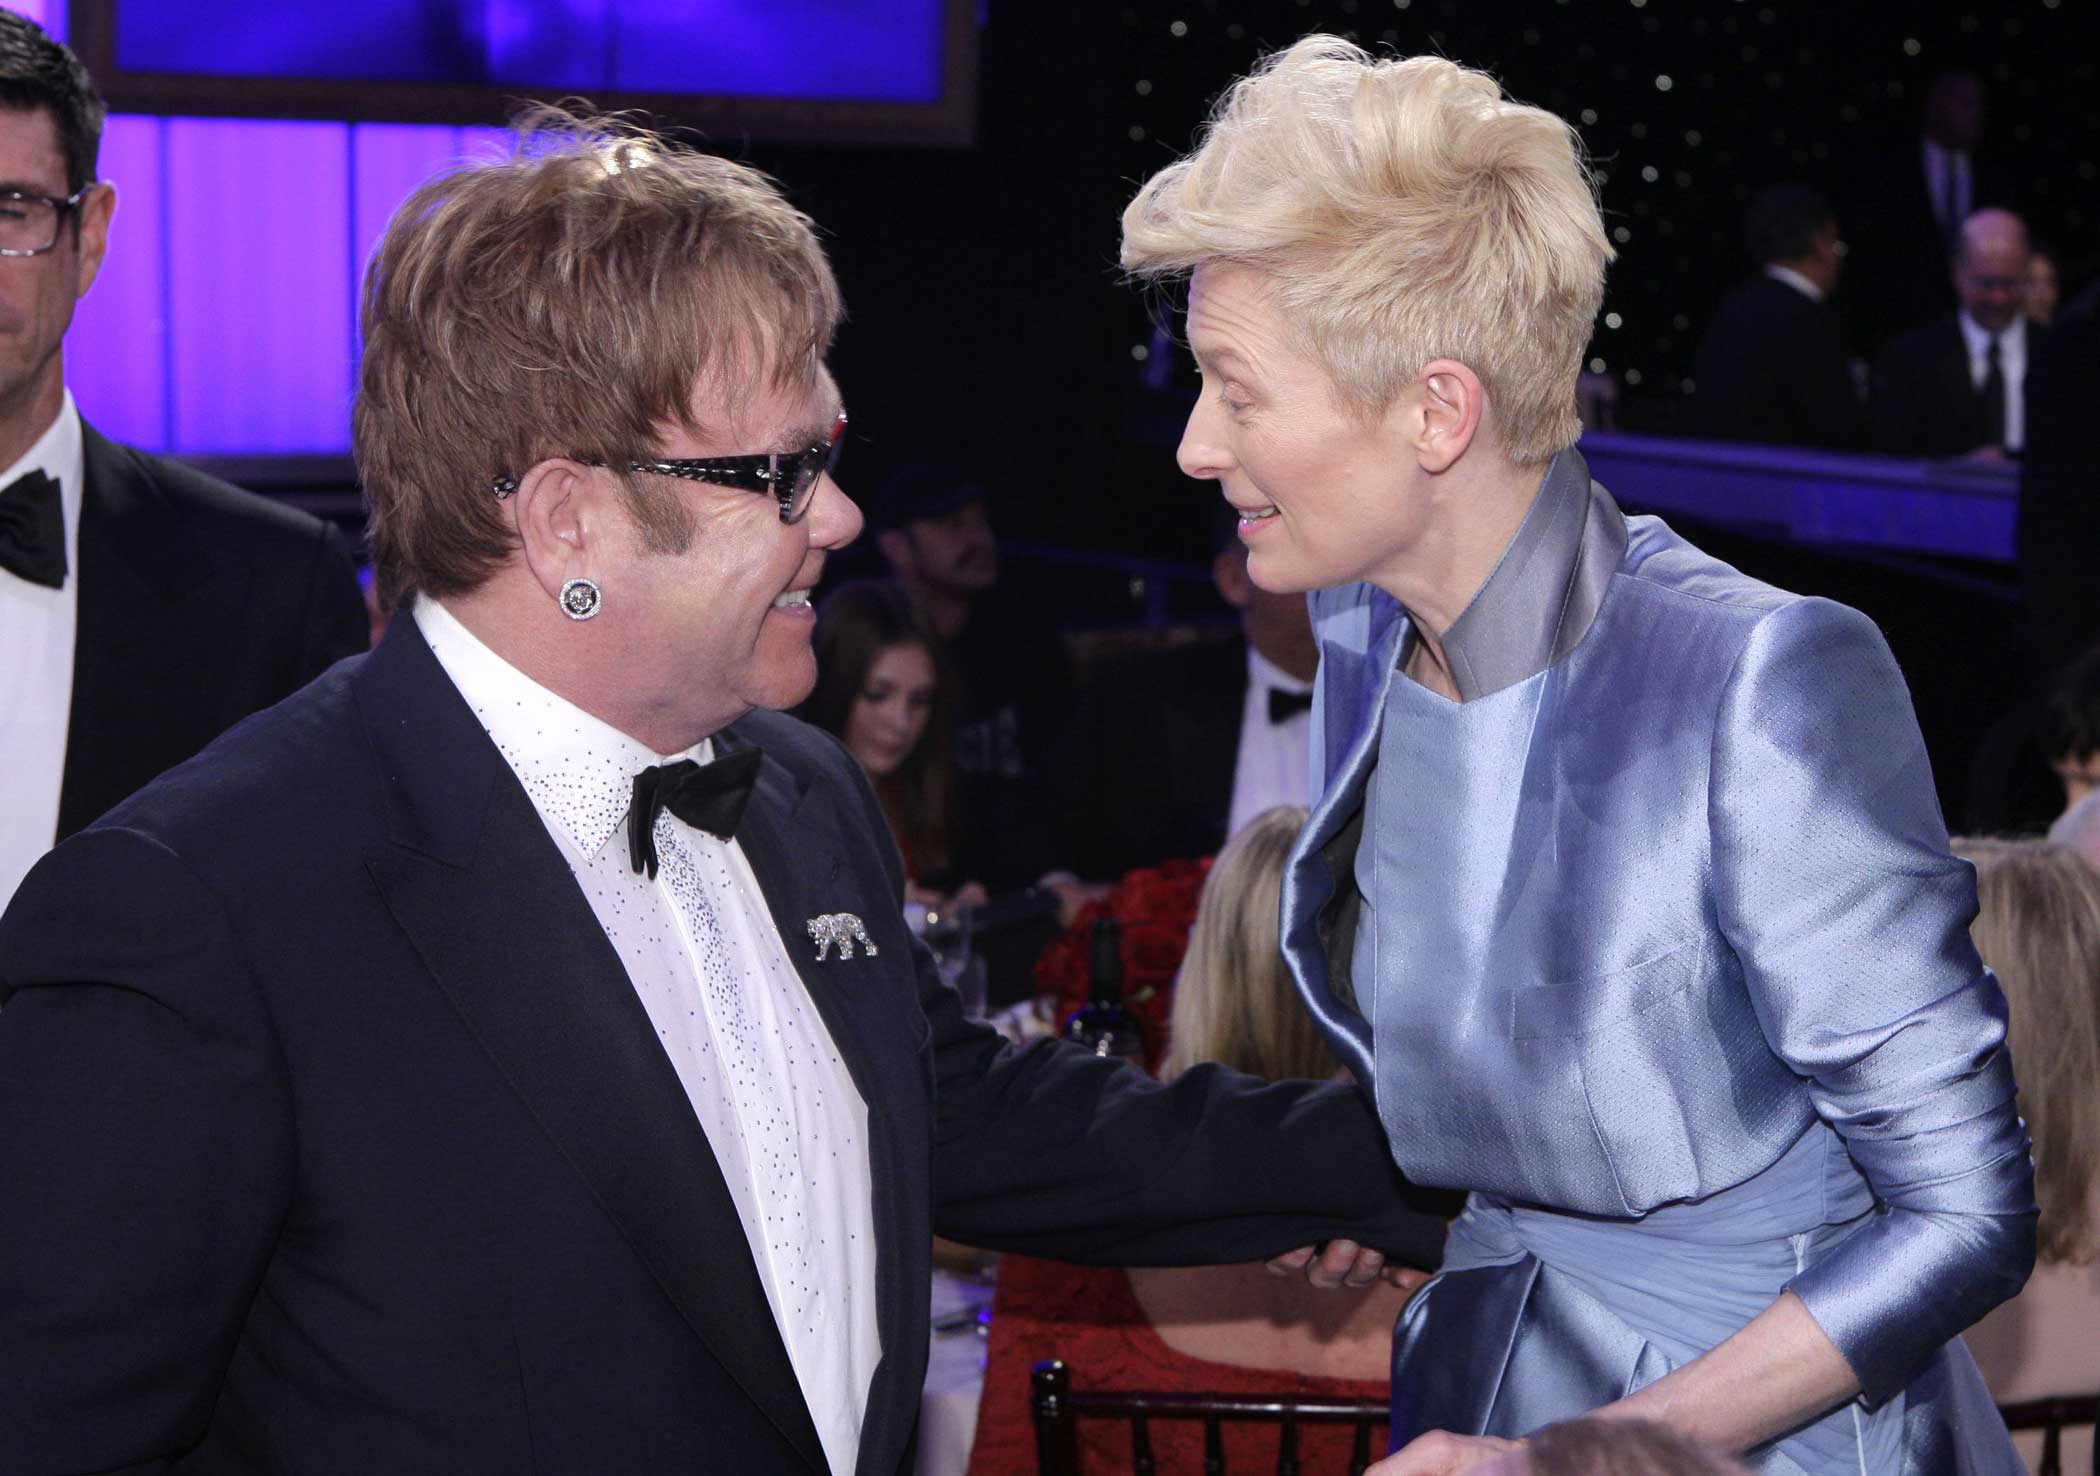 Elton John and Tilda Swinton are seen during the 69th Annual Golden Globe Awards on Jan. 15, 2012 in Beverly Hills, Calif.